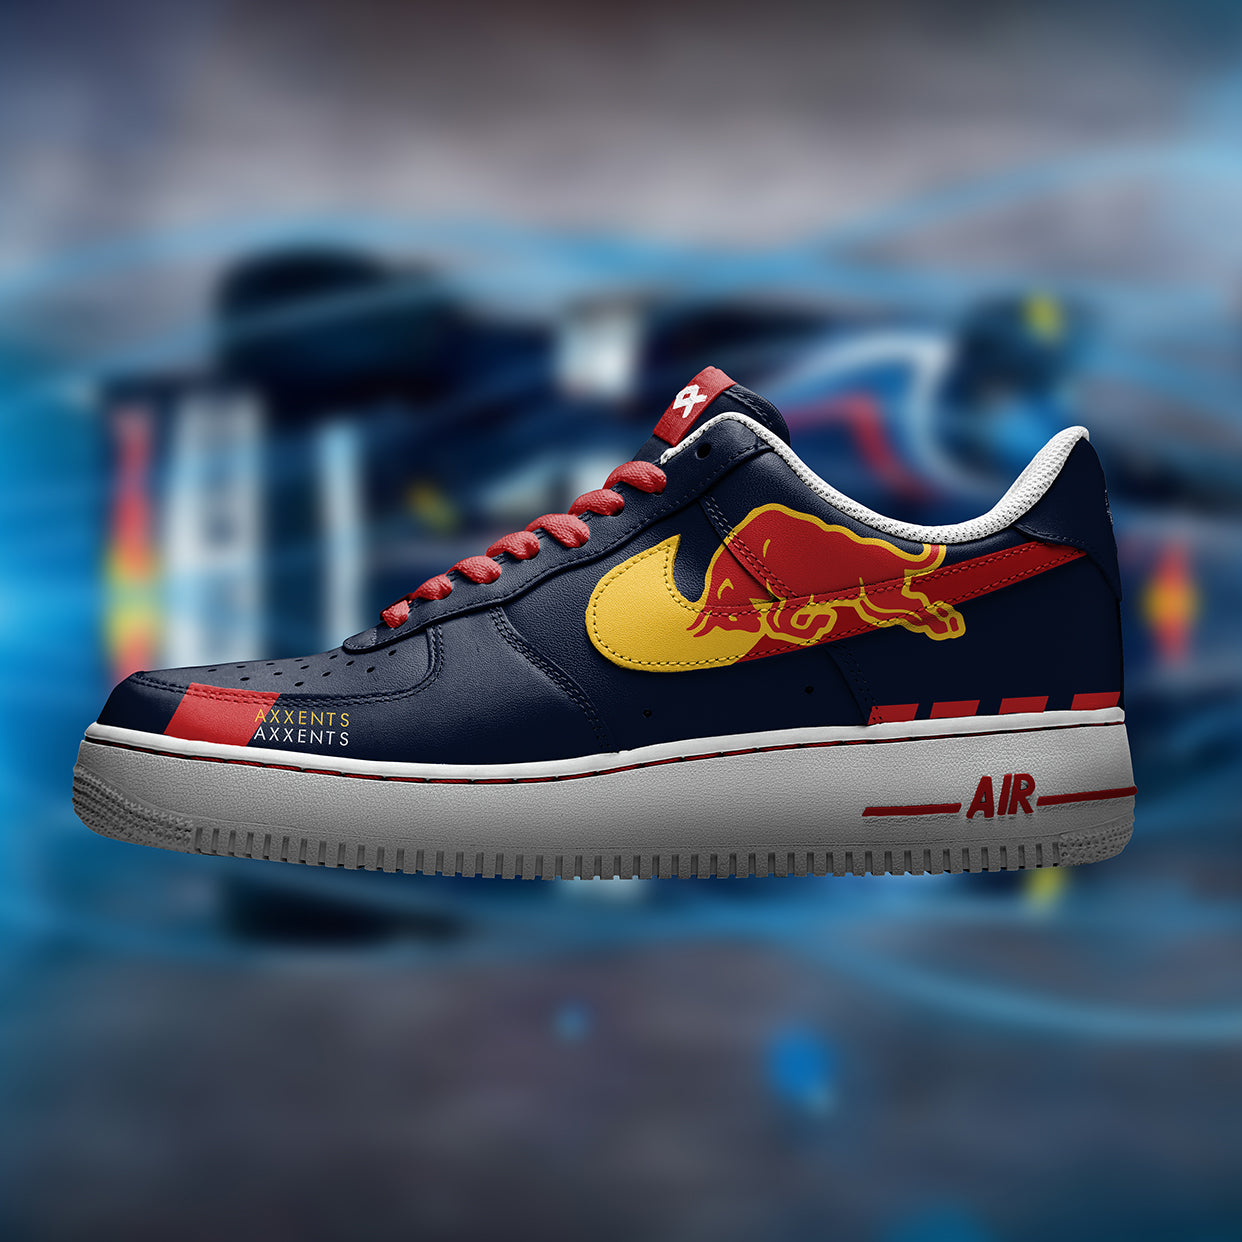 opmerking Opera krater F1 RBULL" Nike AF1 (Formula 1 Collection) – axxents